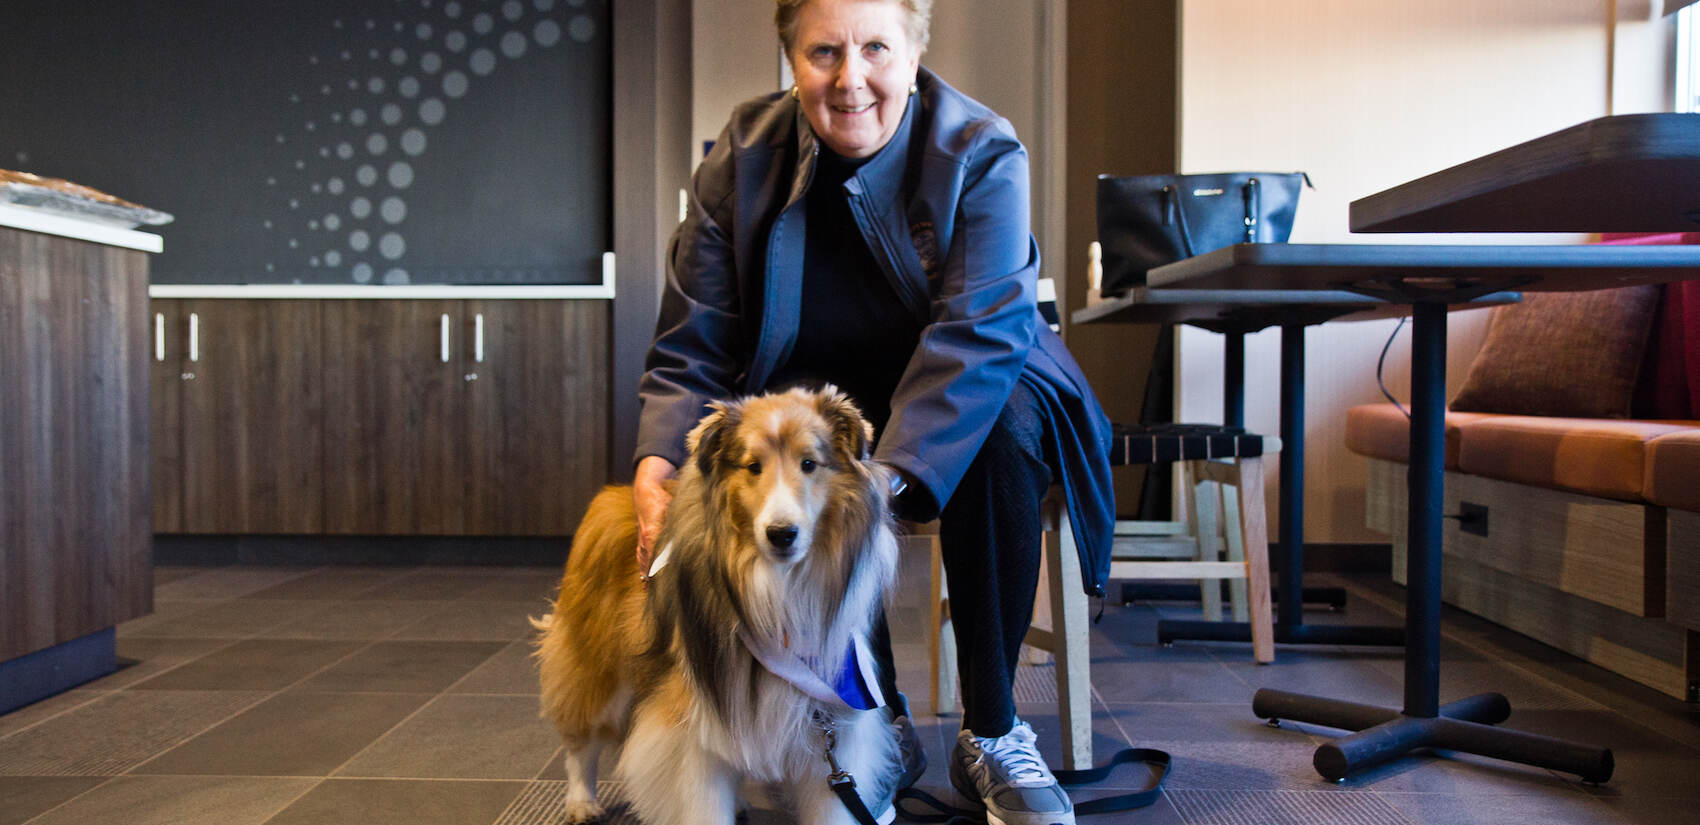  Alice Hoersch and Dyson, a retired AKC champion turned therapy dog, were on hand at the preview of the 2021 National Dog Show represent the NDS Therapy Dog Ambassador Team. (Kimberly Paynter/WHYY)